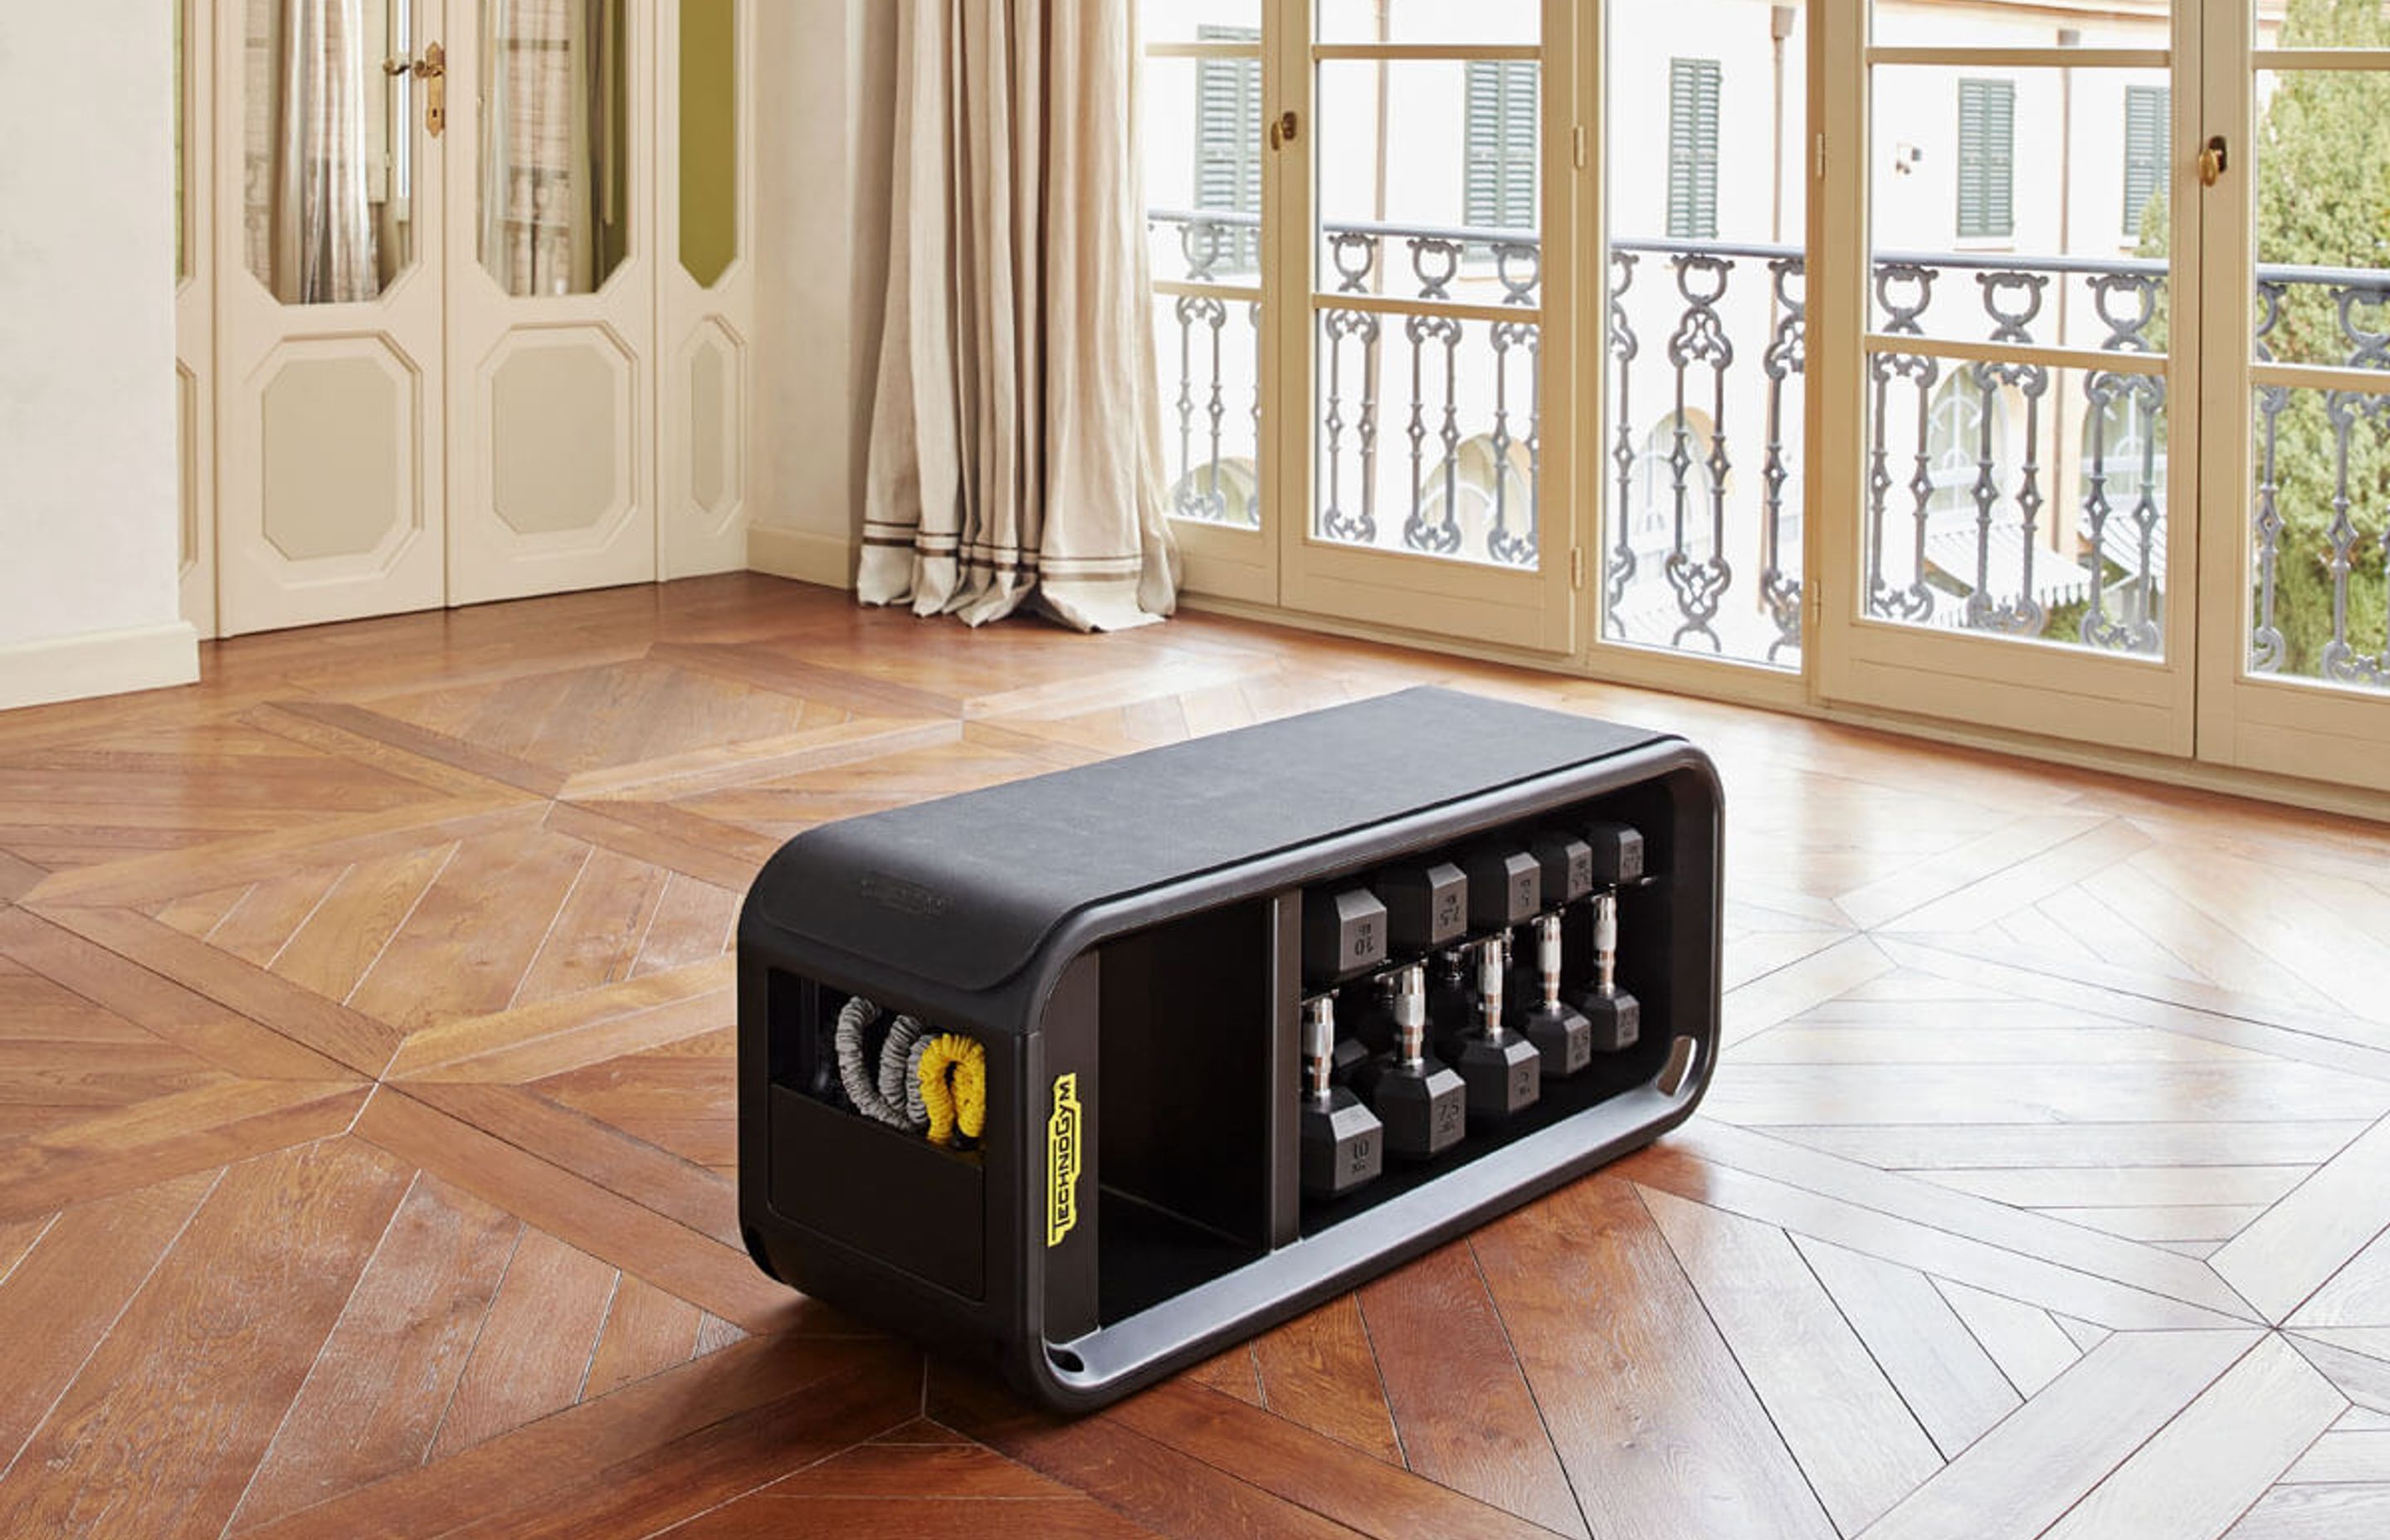 The sleek and versatile Technogym Bench with dedicated storage holds all the tools you need for a complete workout.